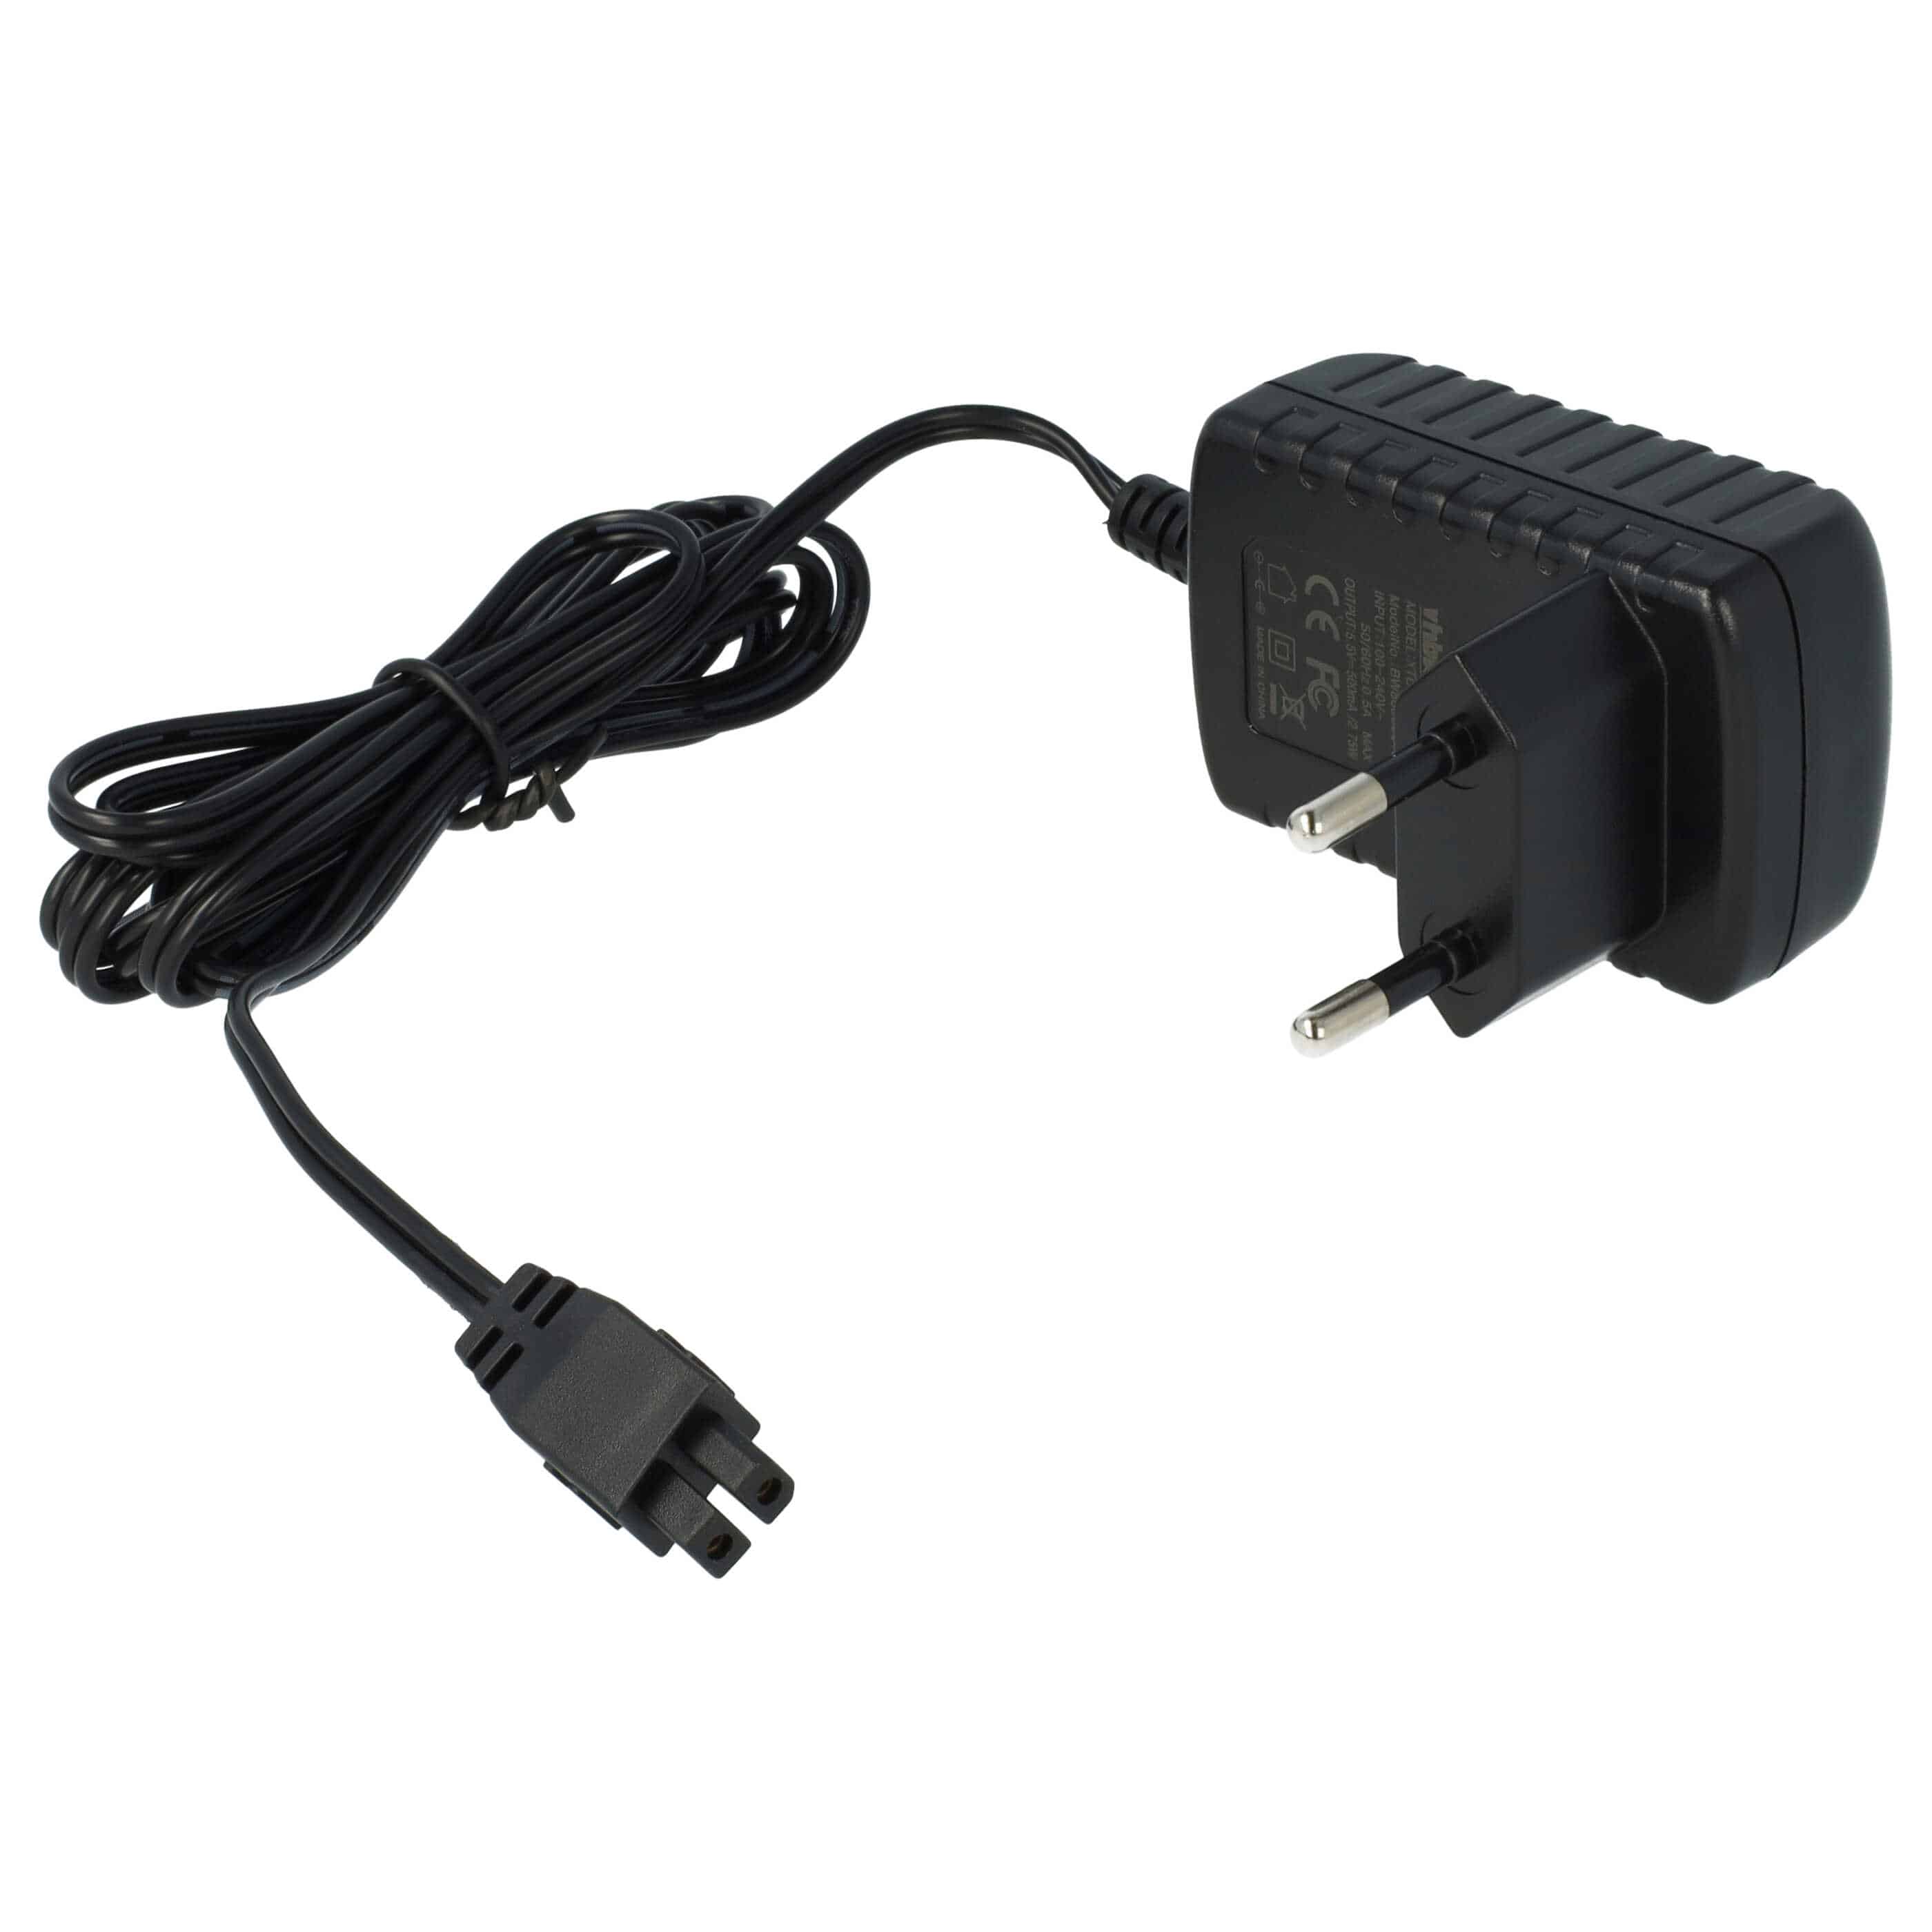 Mains Power Adapter / Charger suitable for Gardena AccuCut Li for GardenaGrass Shears